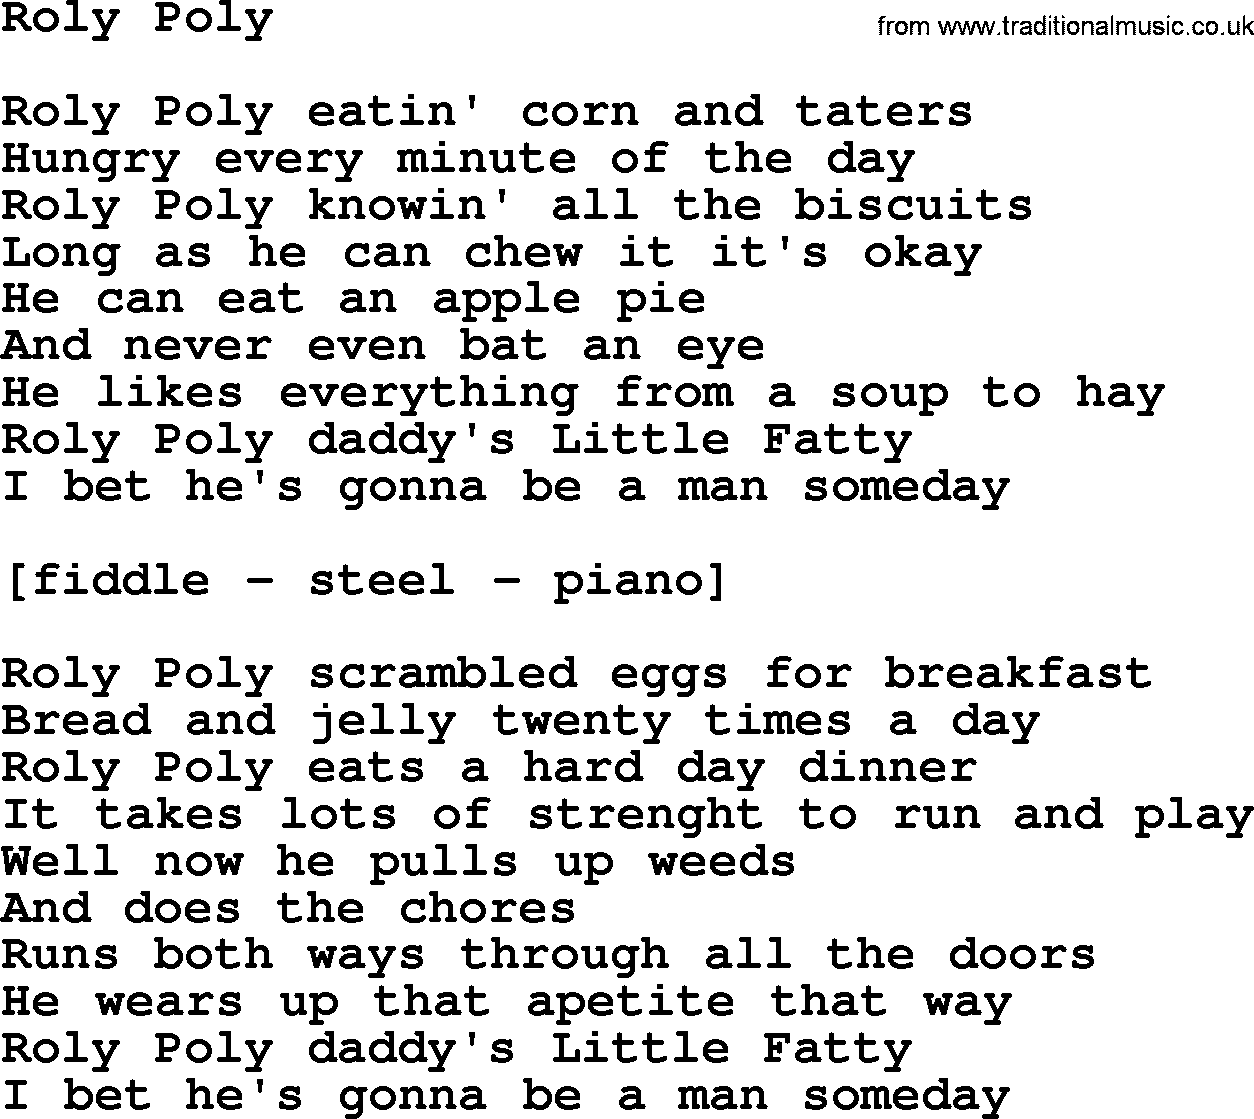 Willie Nelson song: Roly Poly lyrics